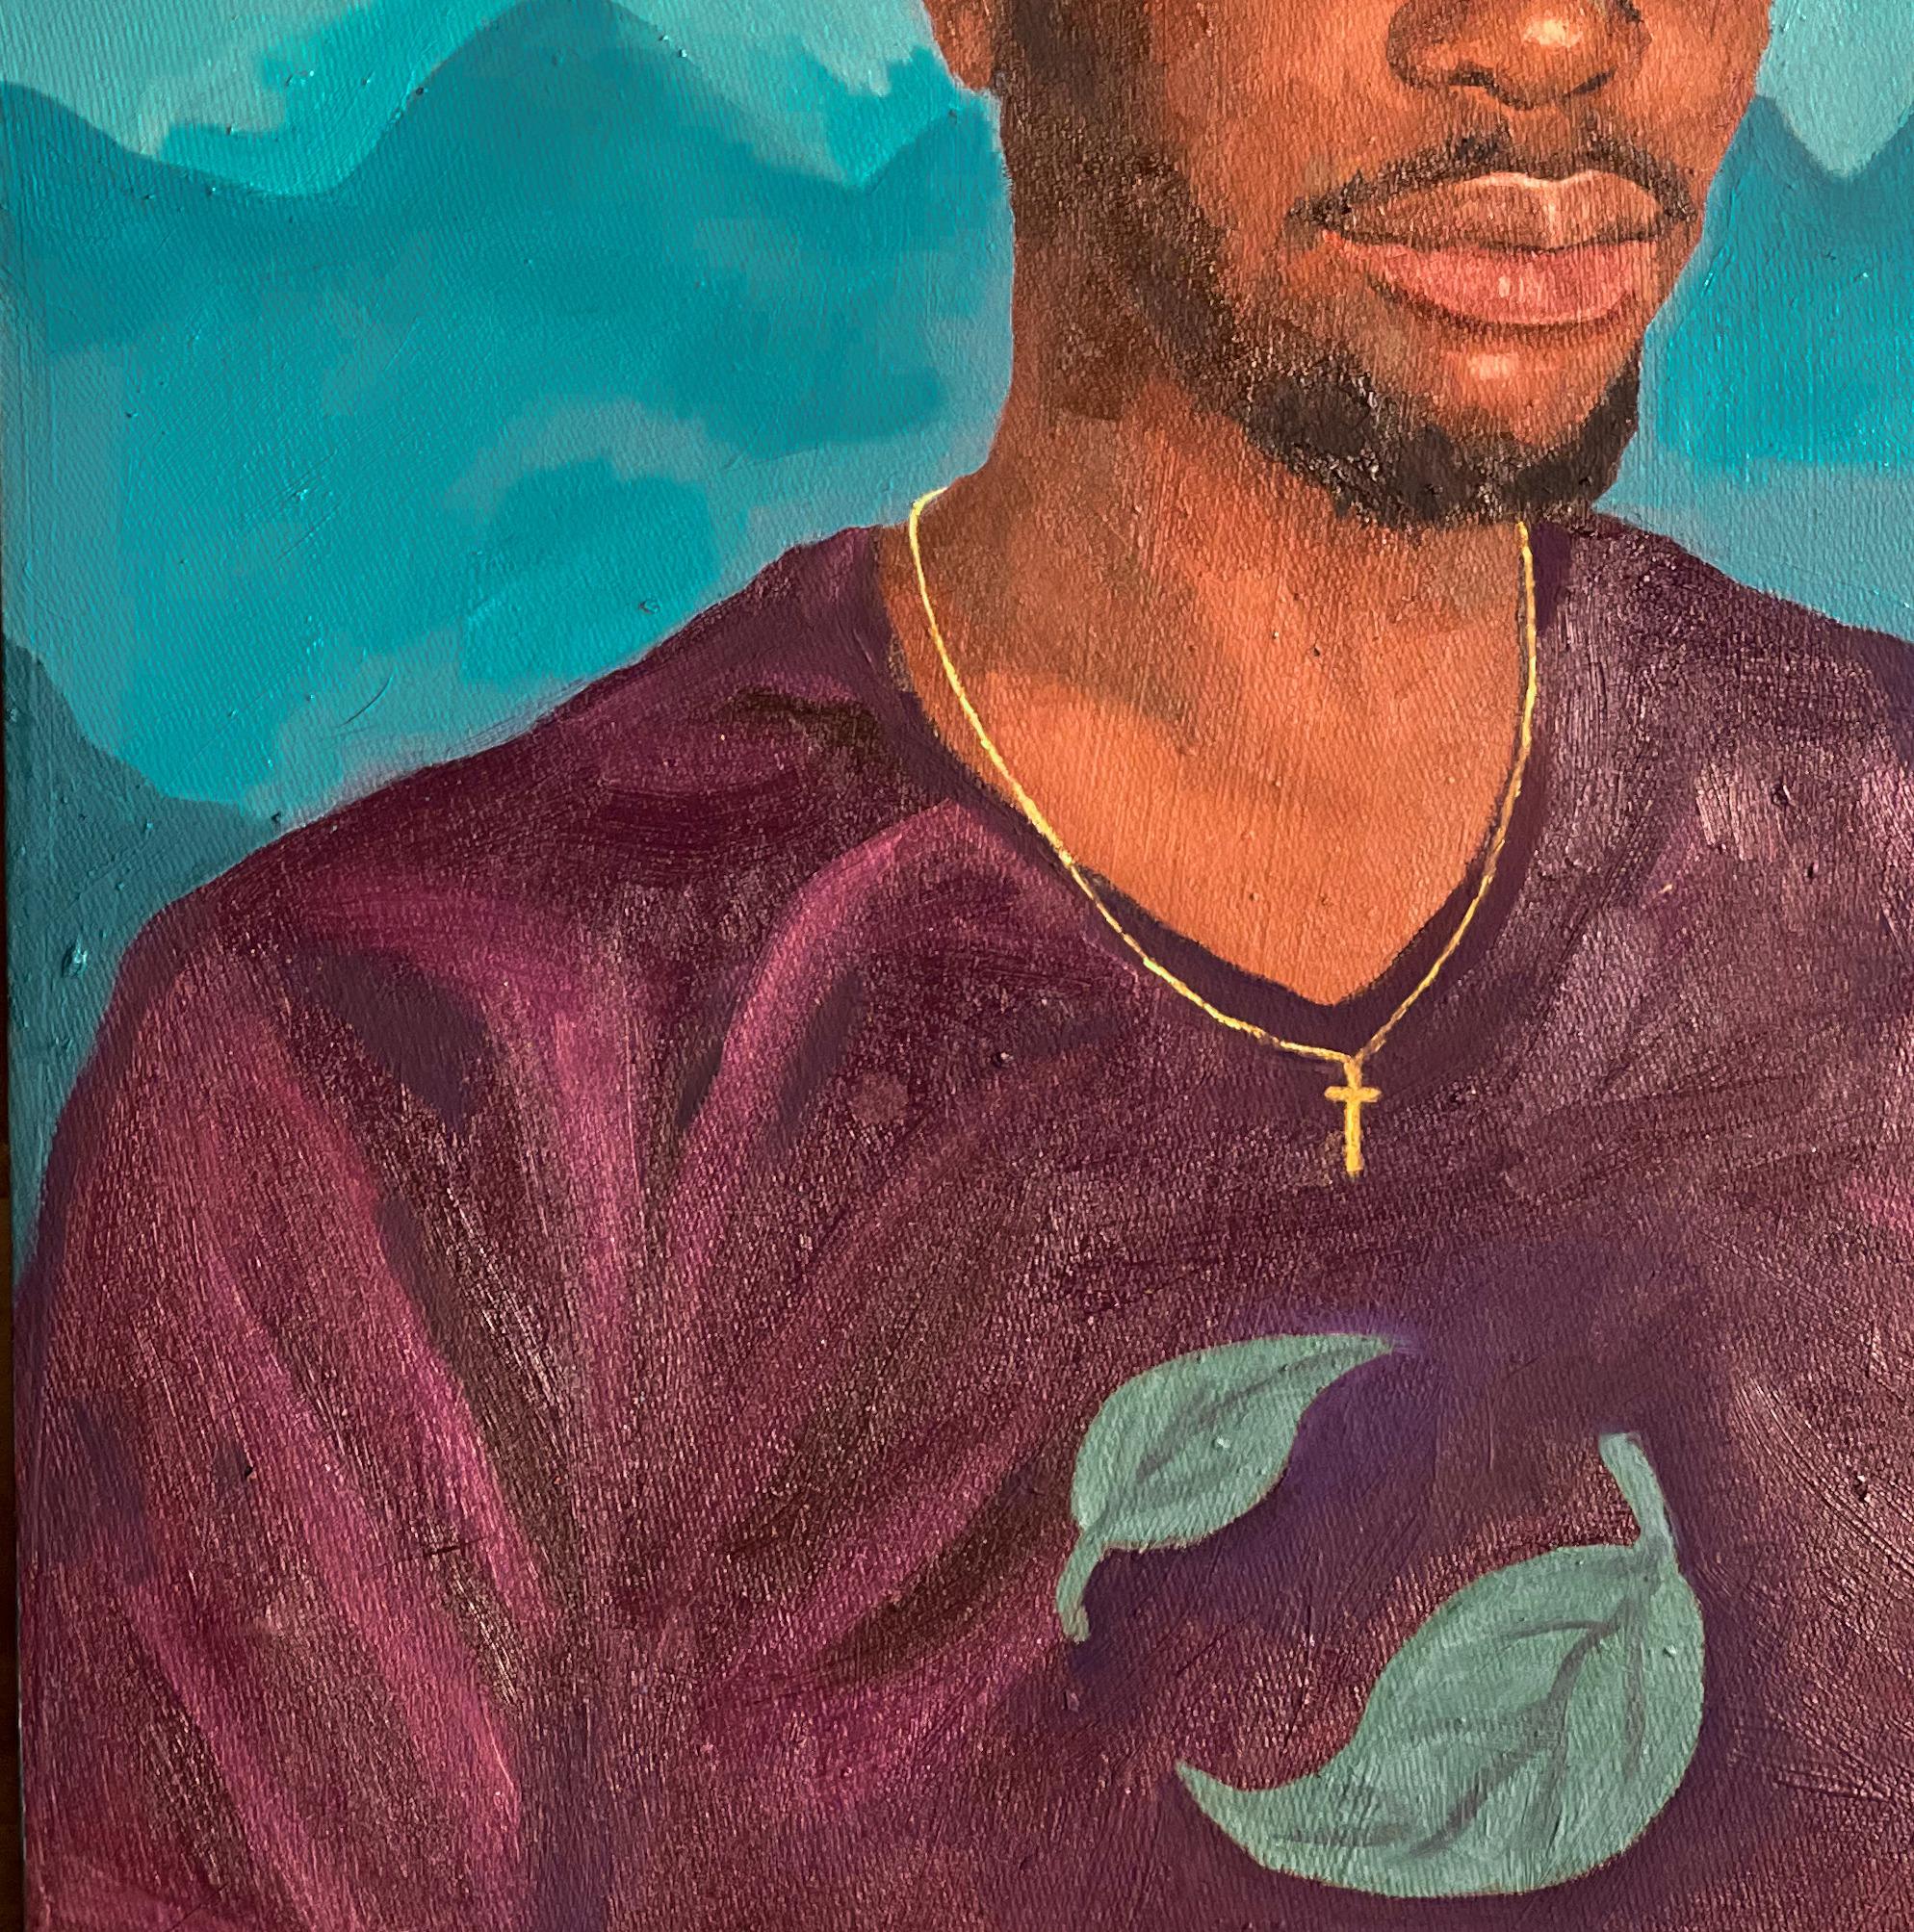 African Boy is a series of paintings by talented artist Faith Gbadero. This series of Artworks captures the response and attitudes of African young adults to the struggles and roller coaster of feelings they pass through. Growing into adulthood has